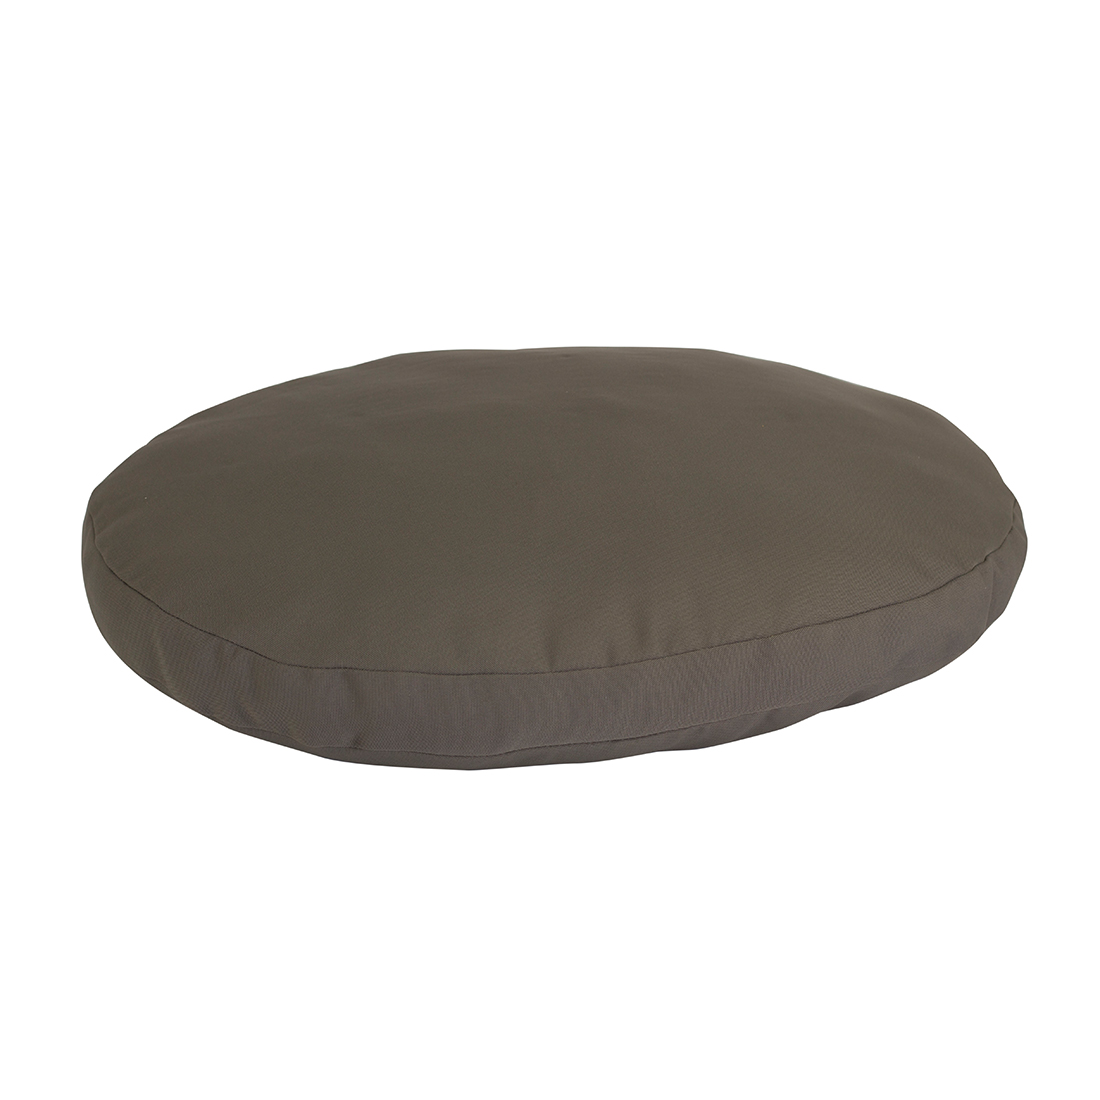 water repellent pillow for 9269 xxl oval